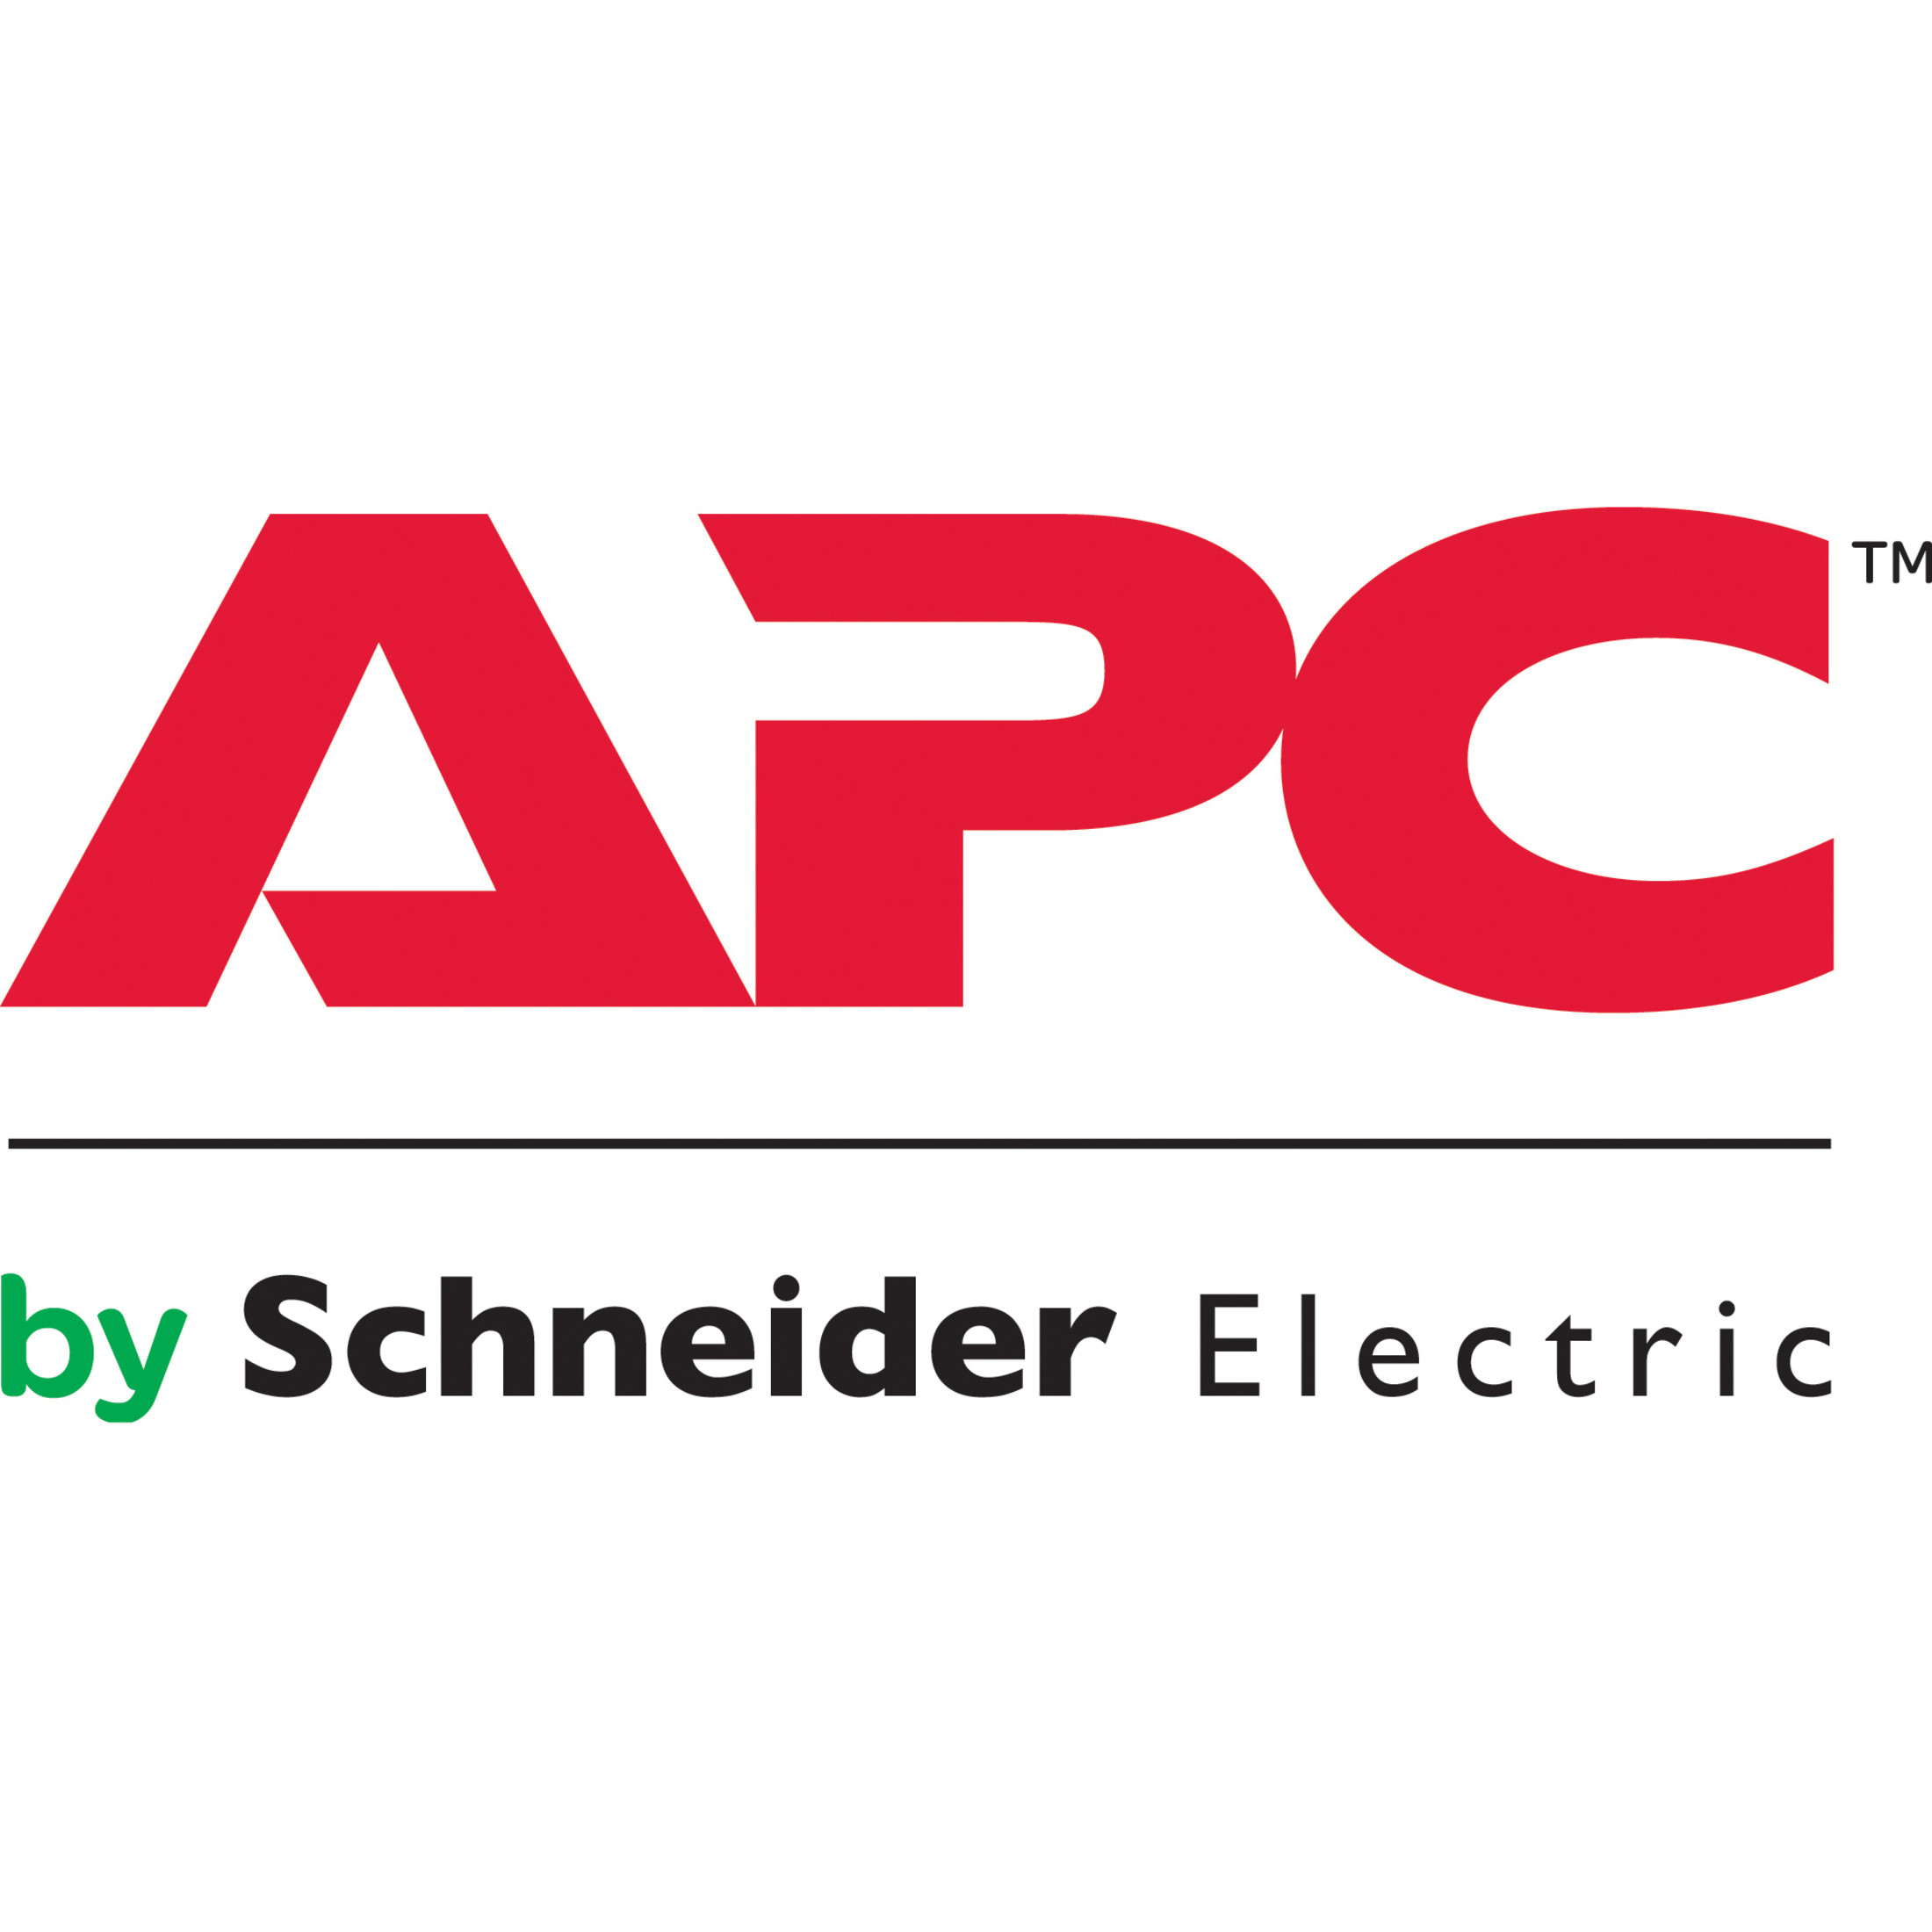 APC by Schneider Electric Assembly ServiceService8 x 5InstallationLaborElectronic and Physical WASSEM-VX-53